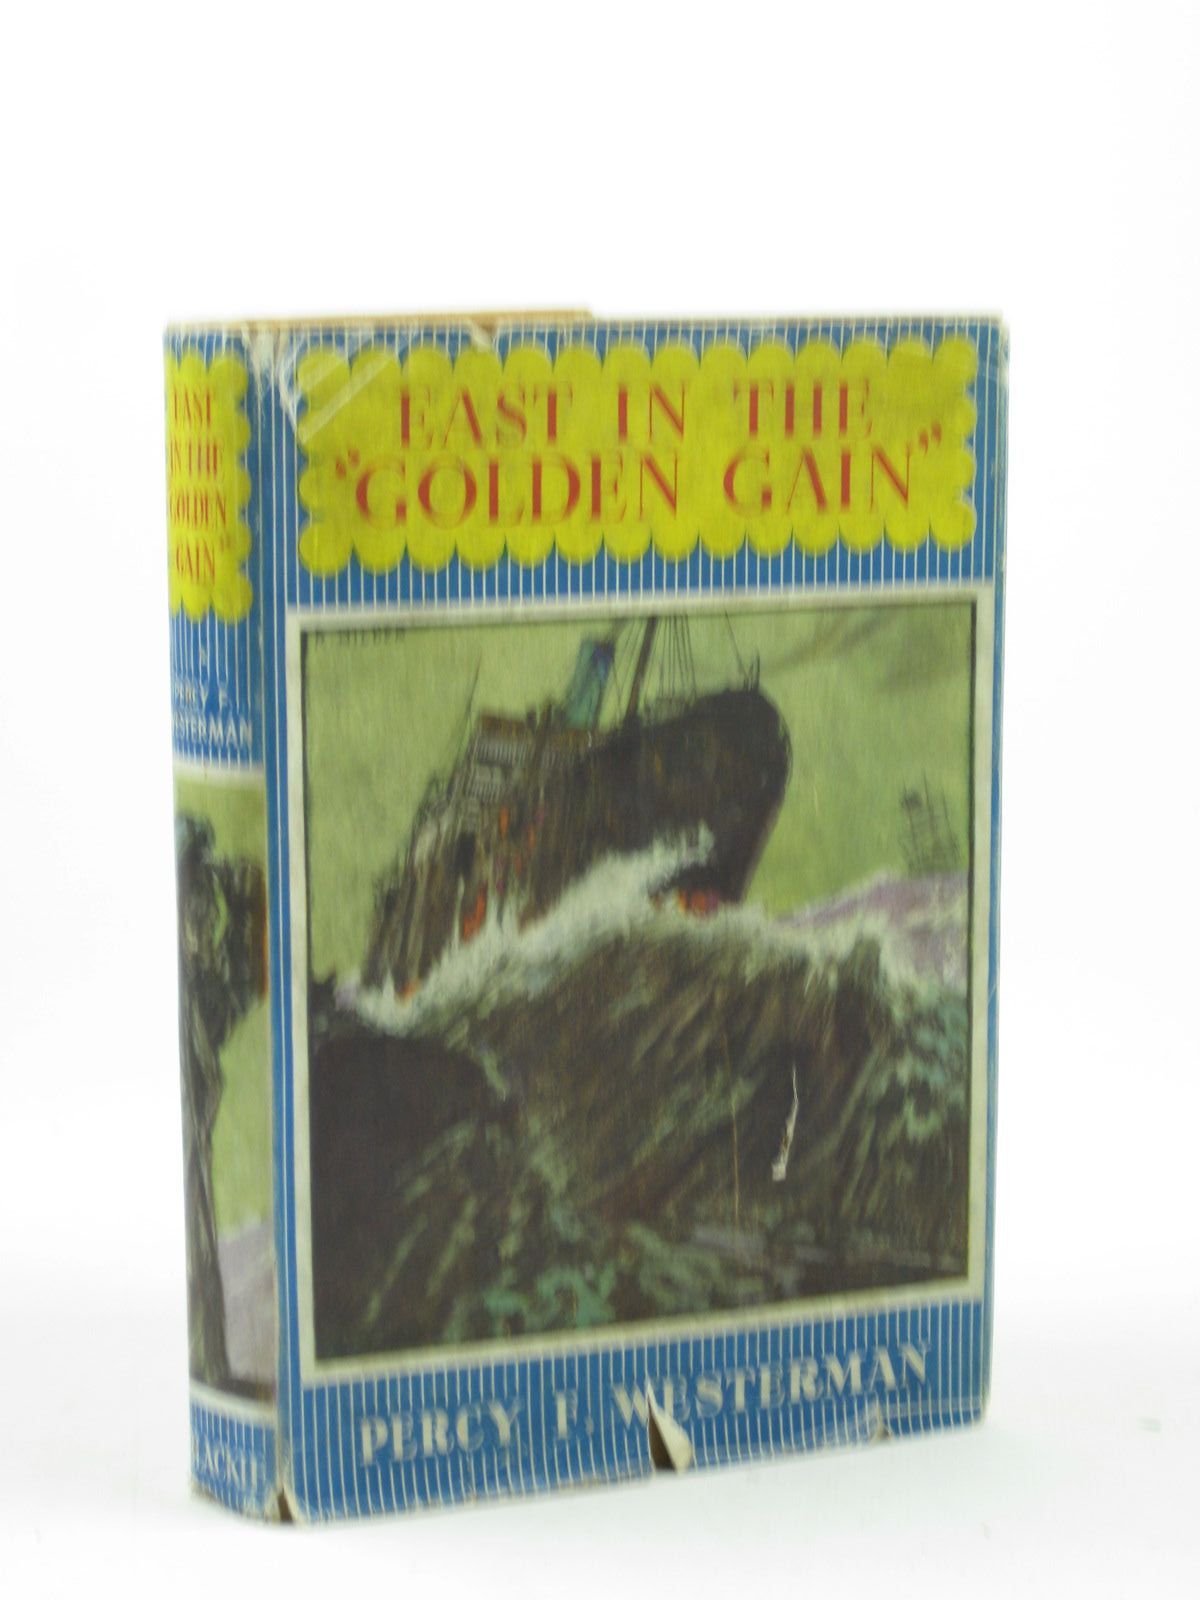 Cover of EAST IN THE GOLDEN GAIN by Percy F. Westerman